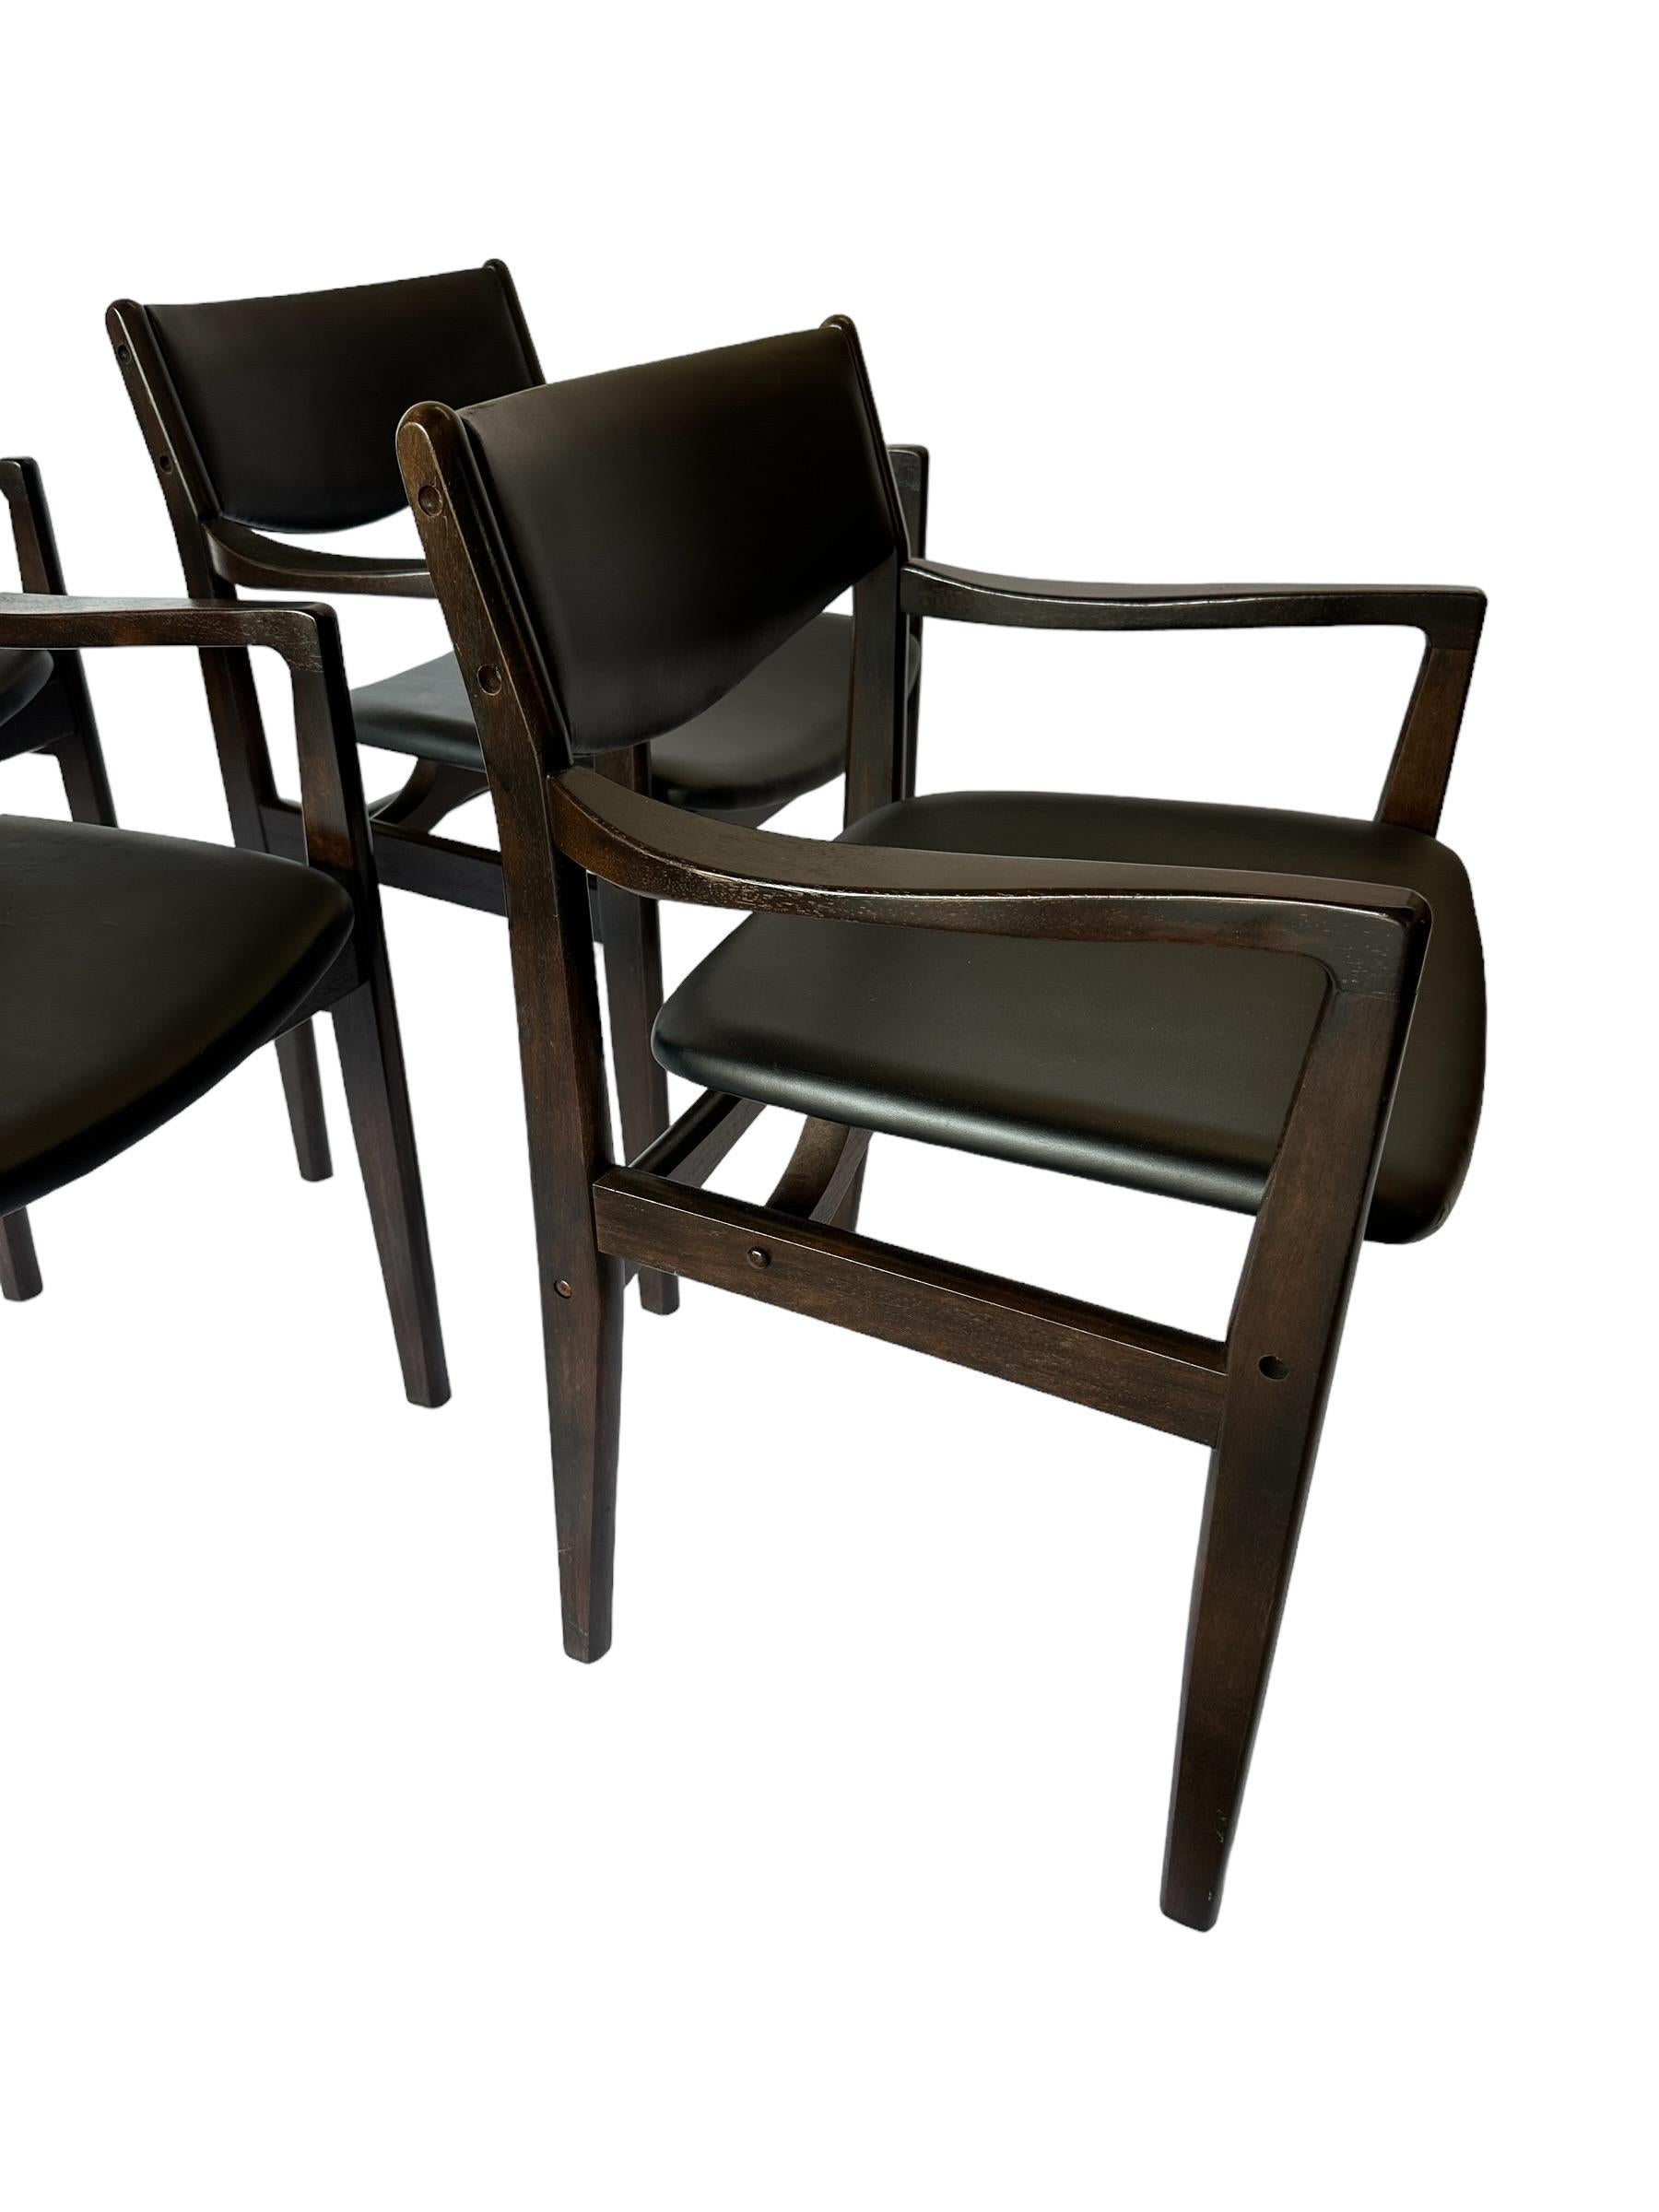 Set of 4 Midcentury Modern Danish Style Hardwood Dining Chairs For Sale 5